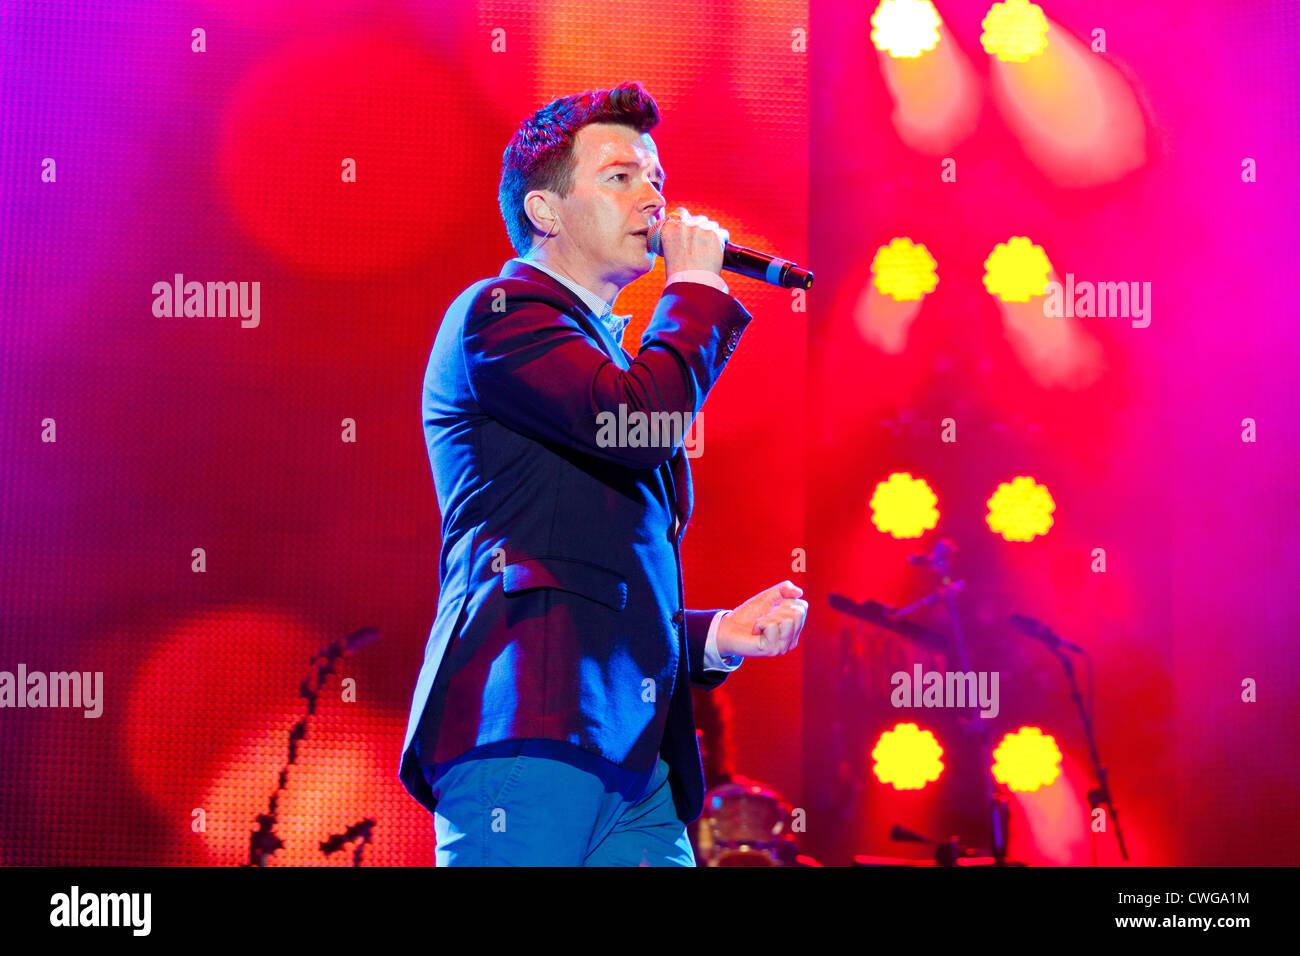 Singer Rick Astley performing on stage at the Rewind Festival Henley on Thames 2012. PER0266 Stock Photo